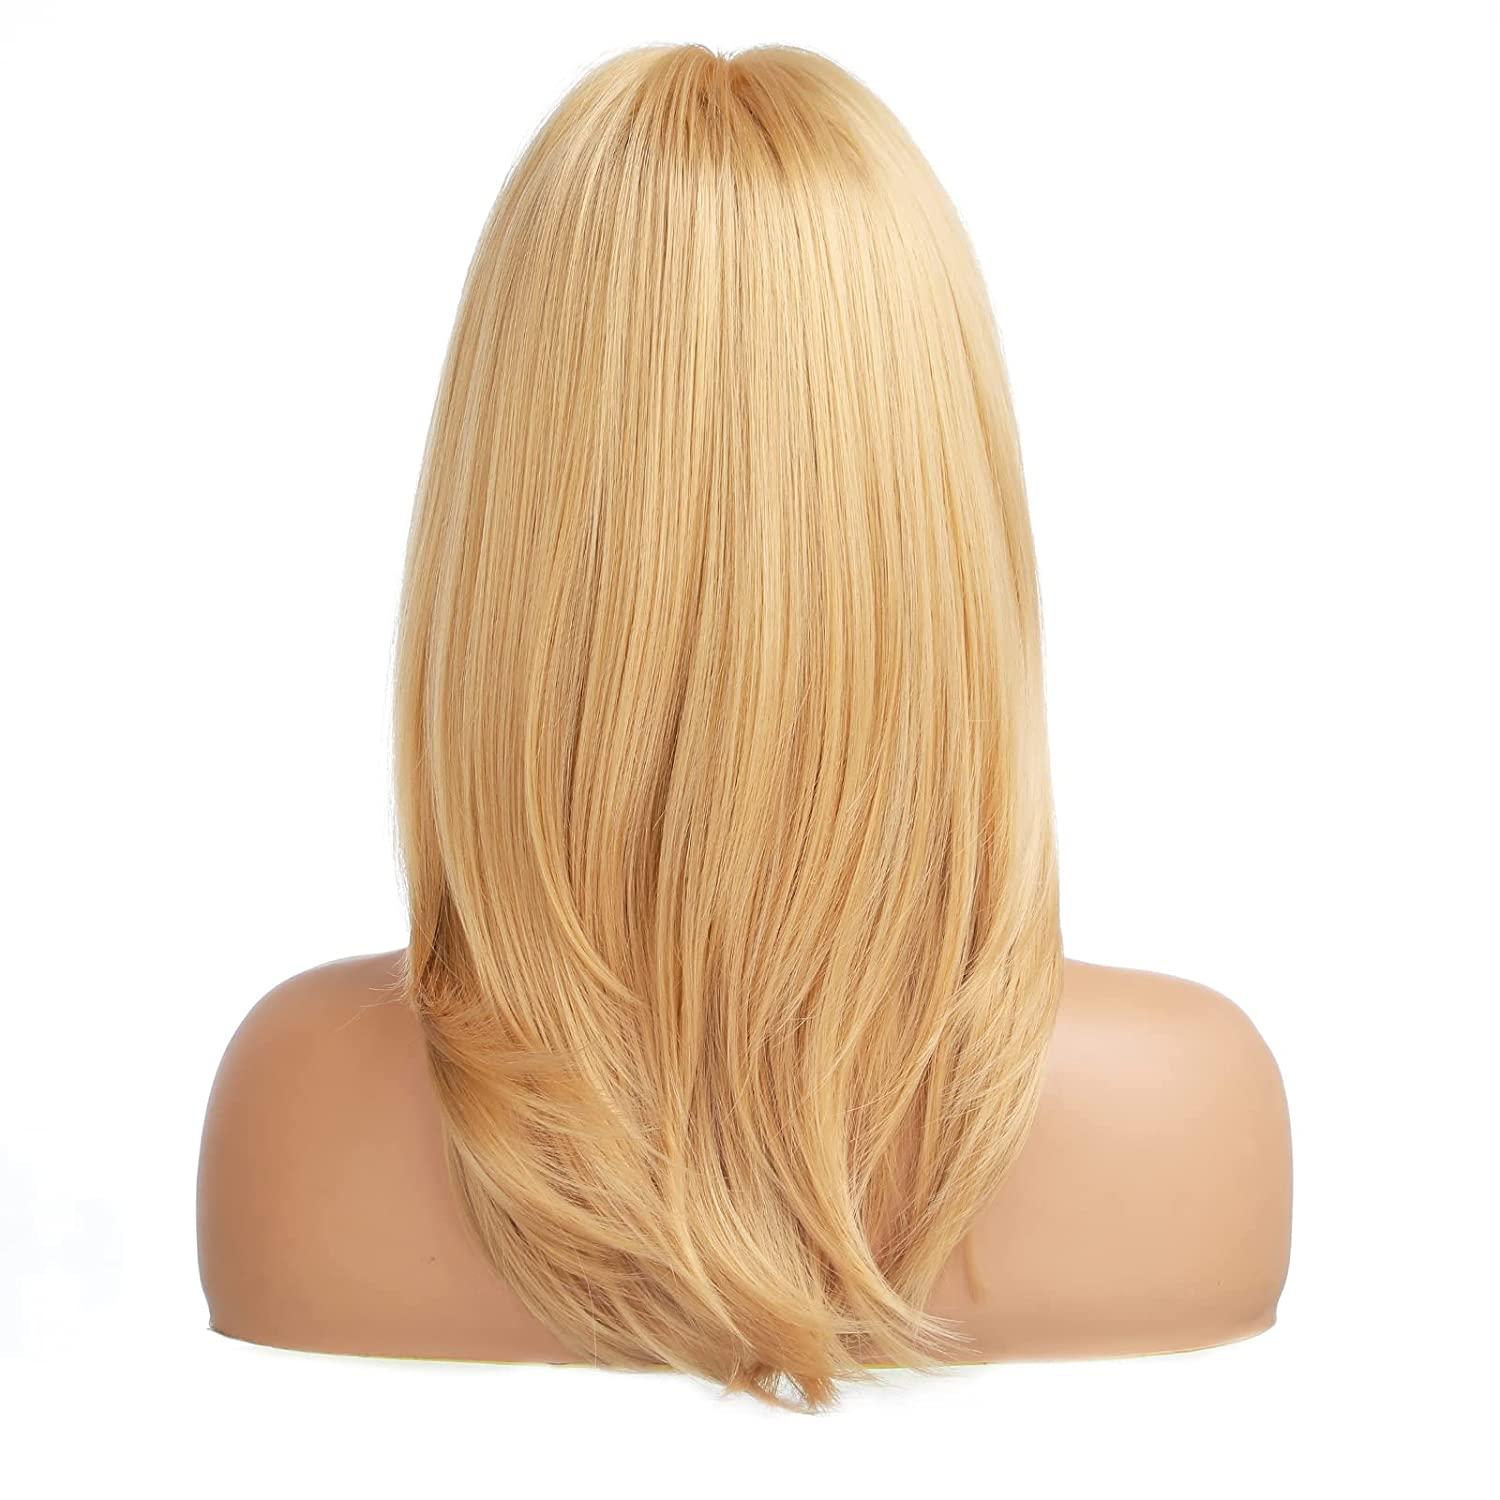 HAIRCUBE Long layered Golden Blonde Wigs for Women, Synthetic Hair Wig with  Bangs for White Women